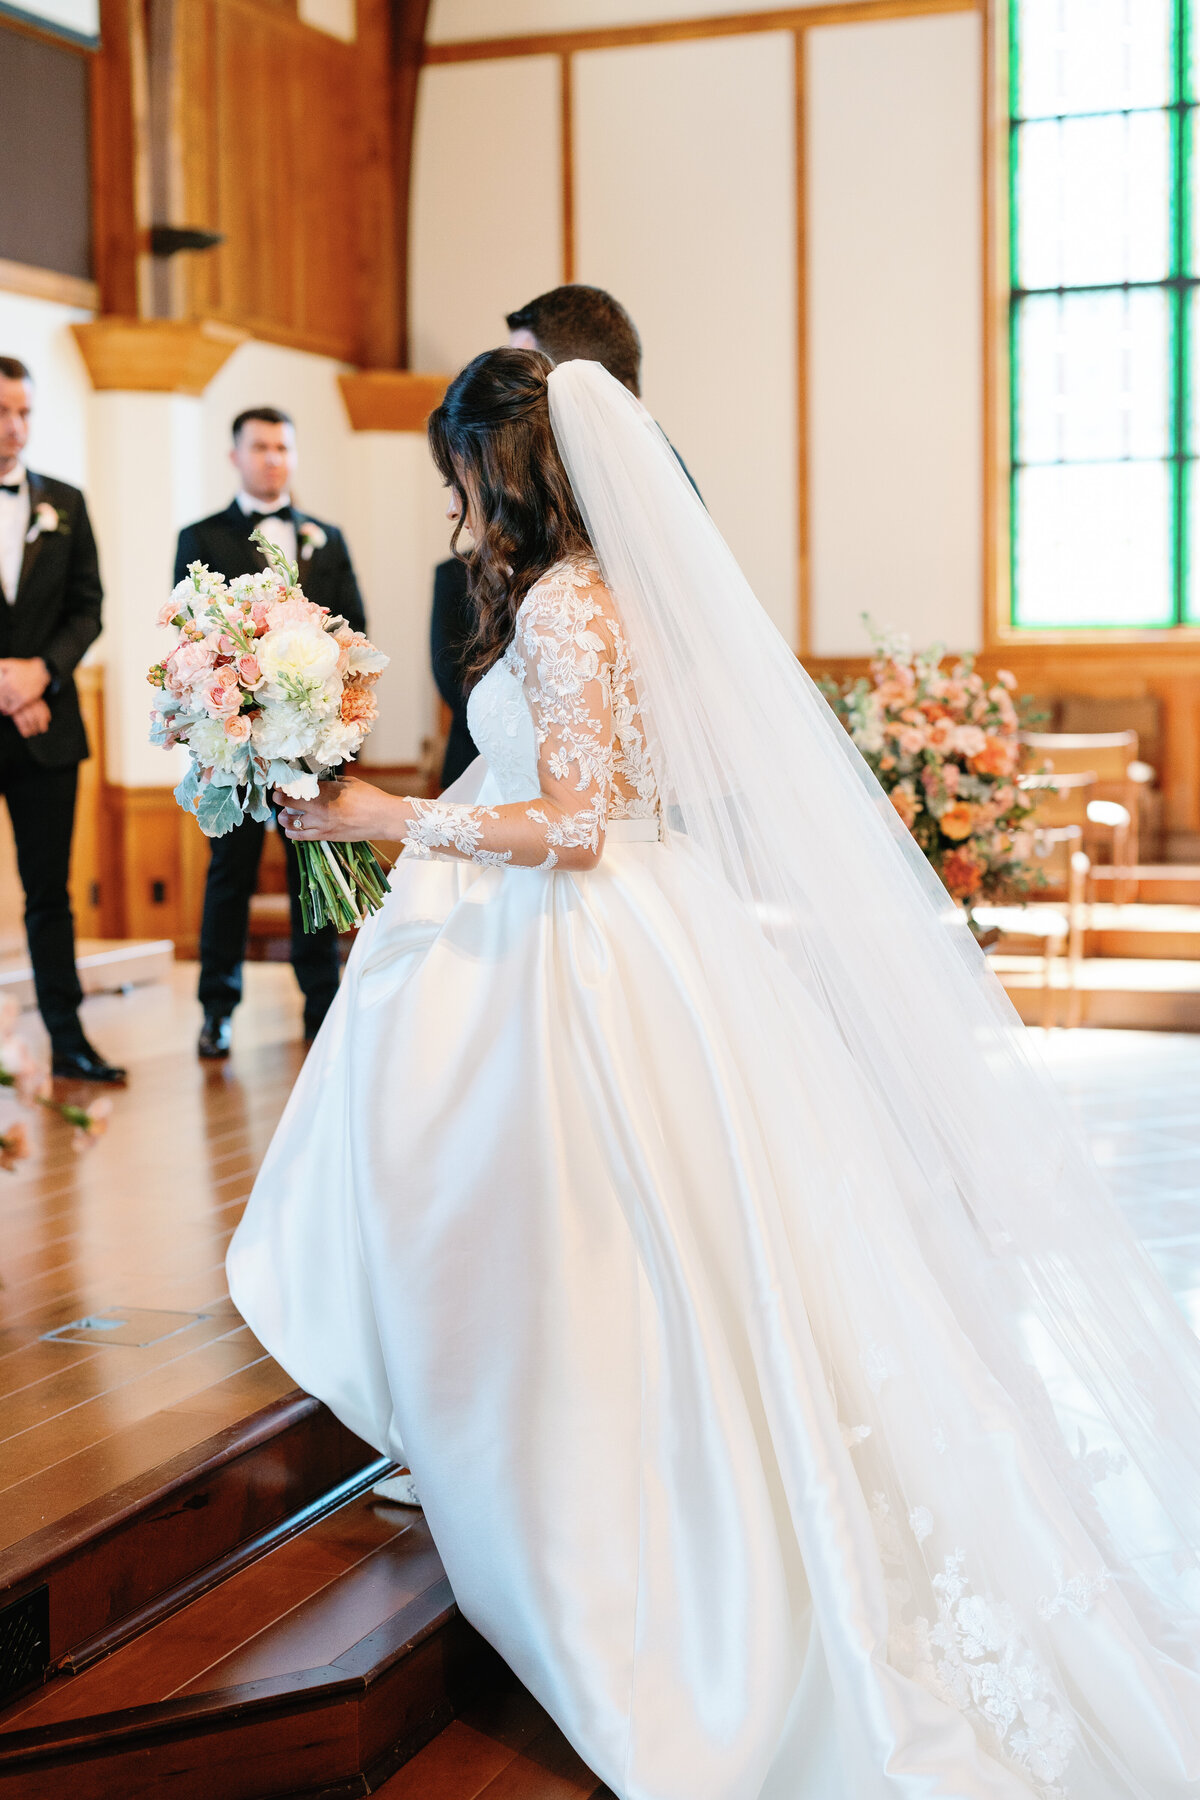 Ellen and Austin - Lee Chapel and Black Fox Farms - East Tennessee Photographer - Alaina René Photography-915